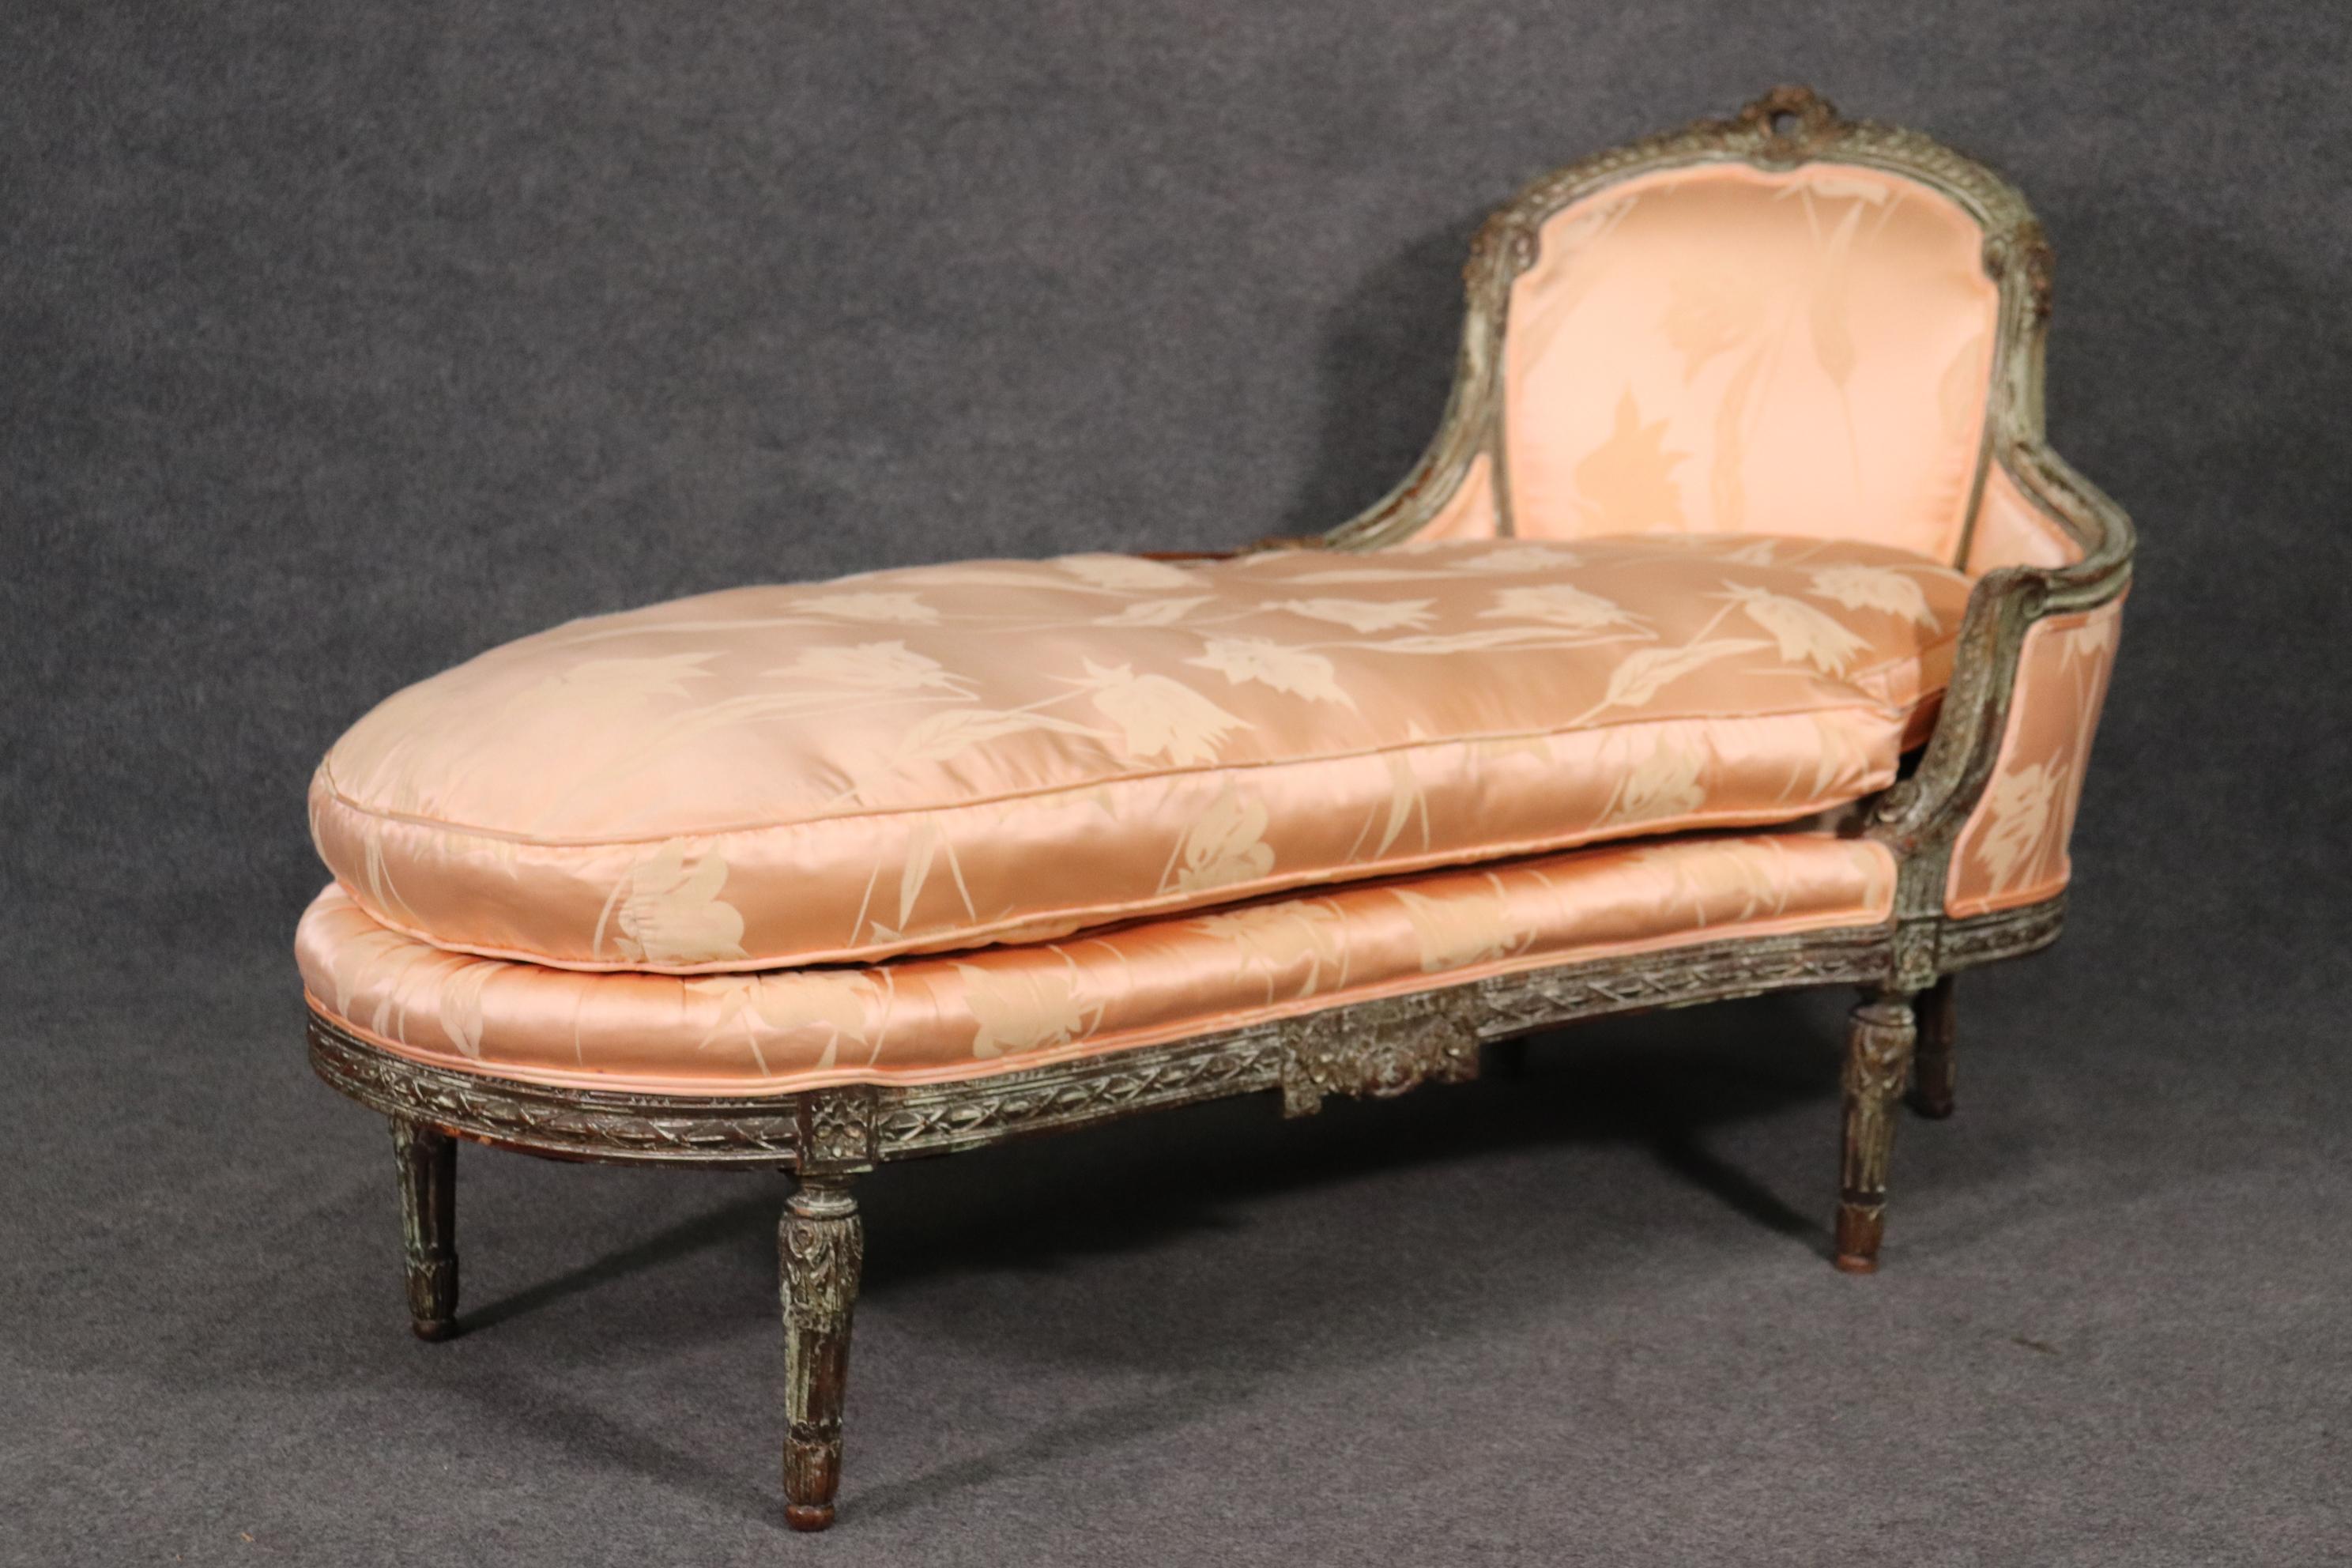 This is a truly beautiful chaise lounge. The upholstery is a gorgeous blush pink silk and the frame is beautifully and tastefully carved and finished as well. Dates to the 1890s era and is French. Measures 58.5 long x 27 wide x 35 tall and seat